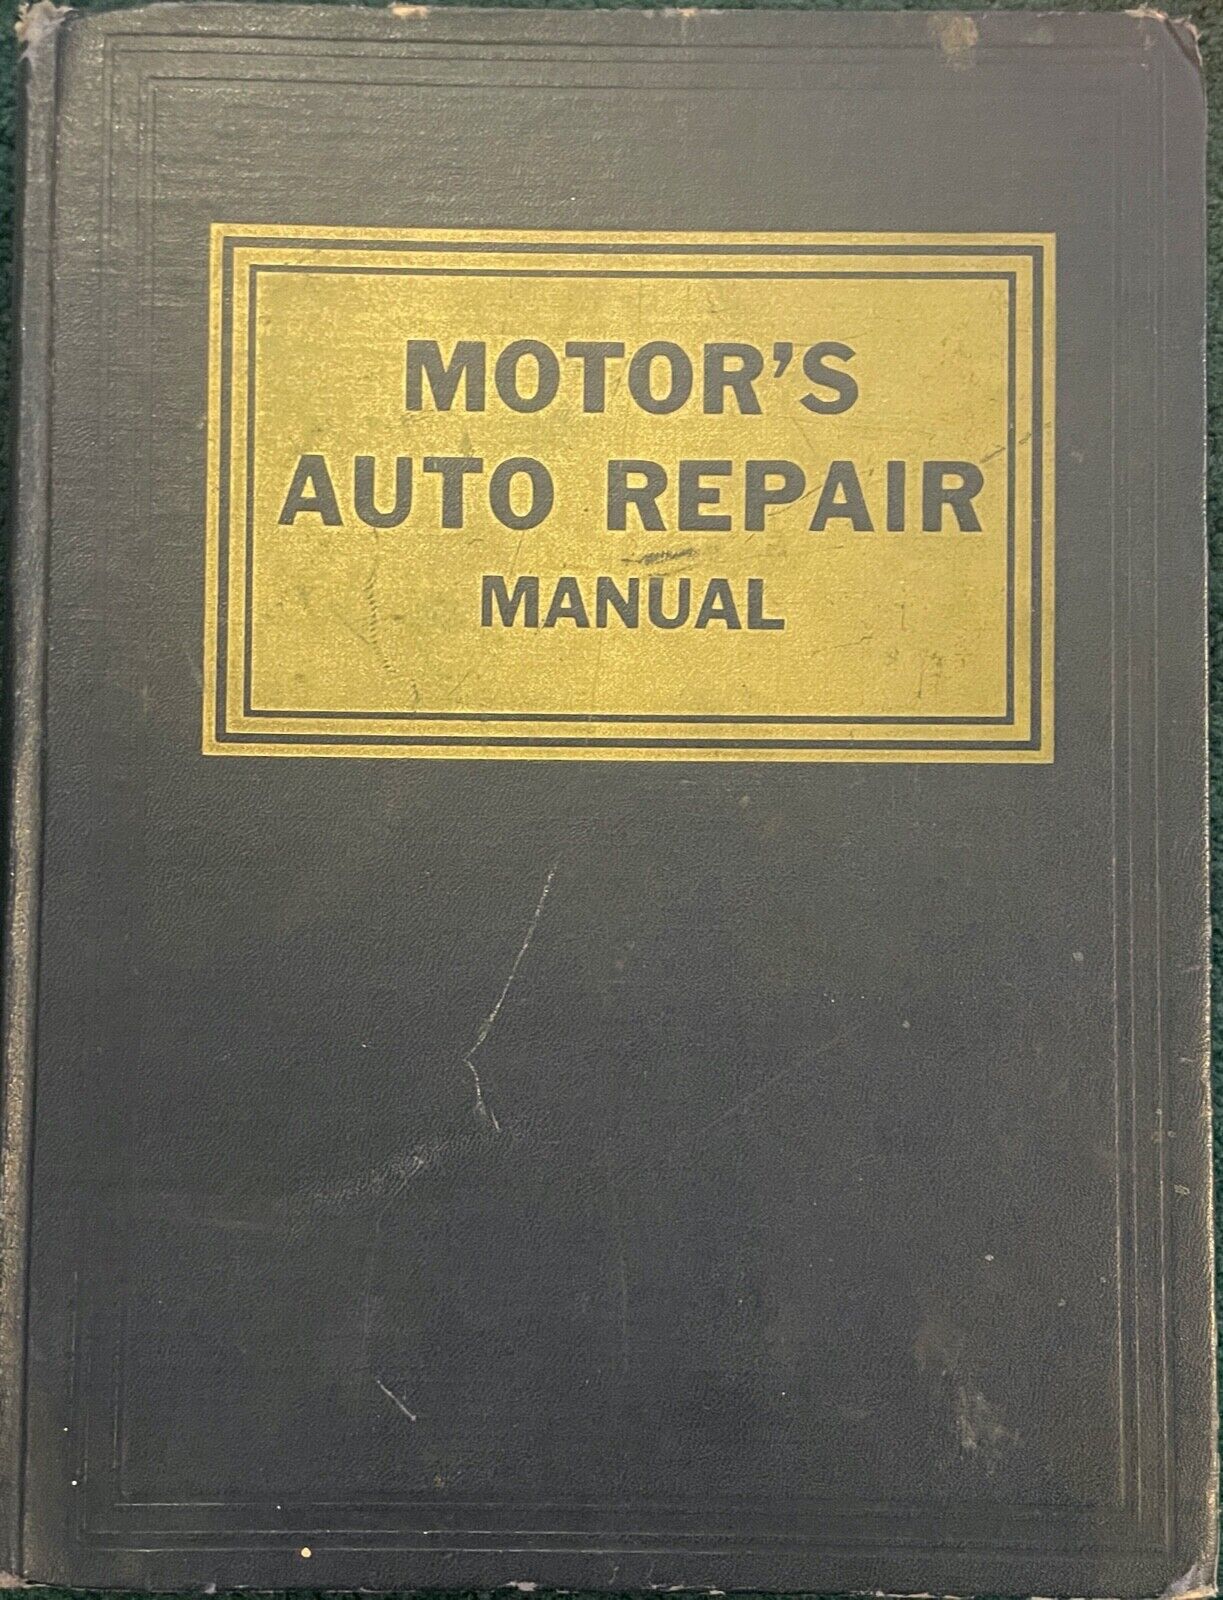 Vintage Motor\'s Auto Repair Manual - 19th Edition for  1946-1956 American Cars